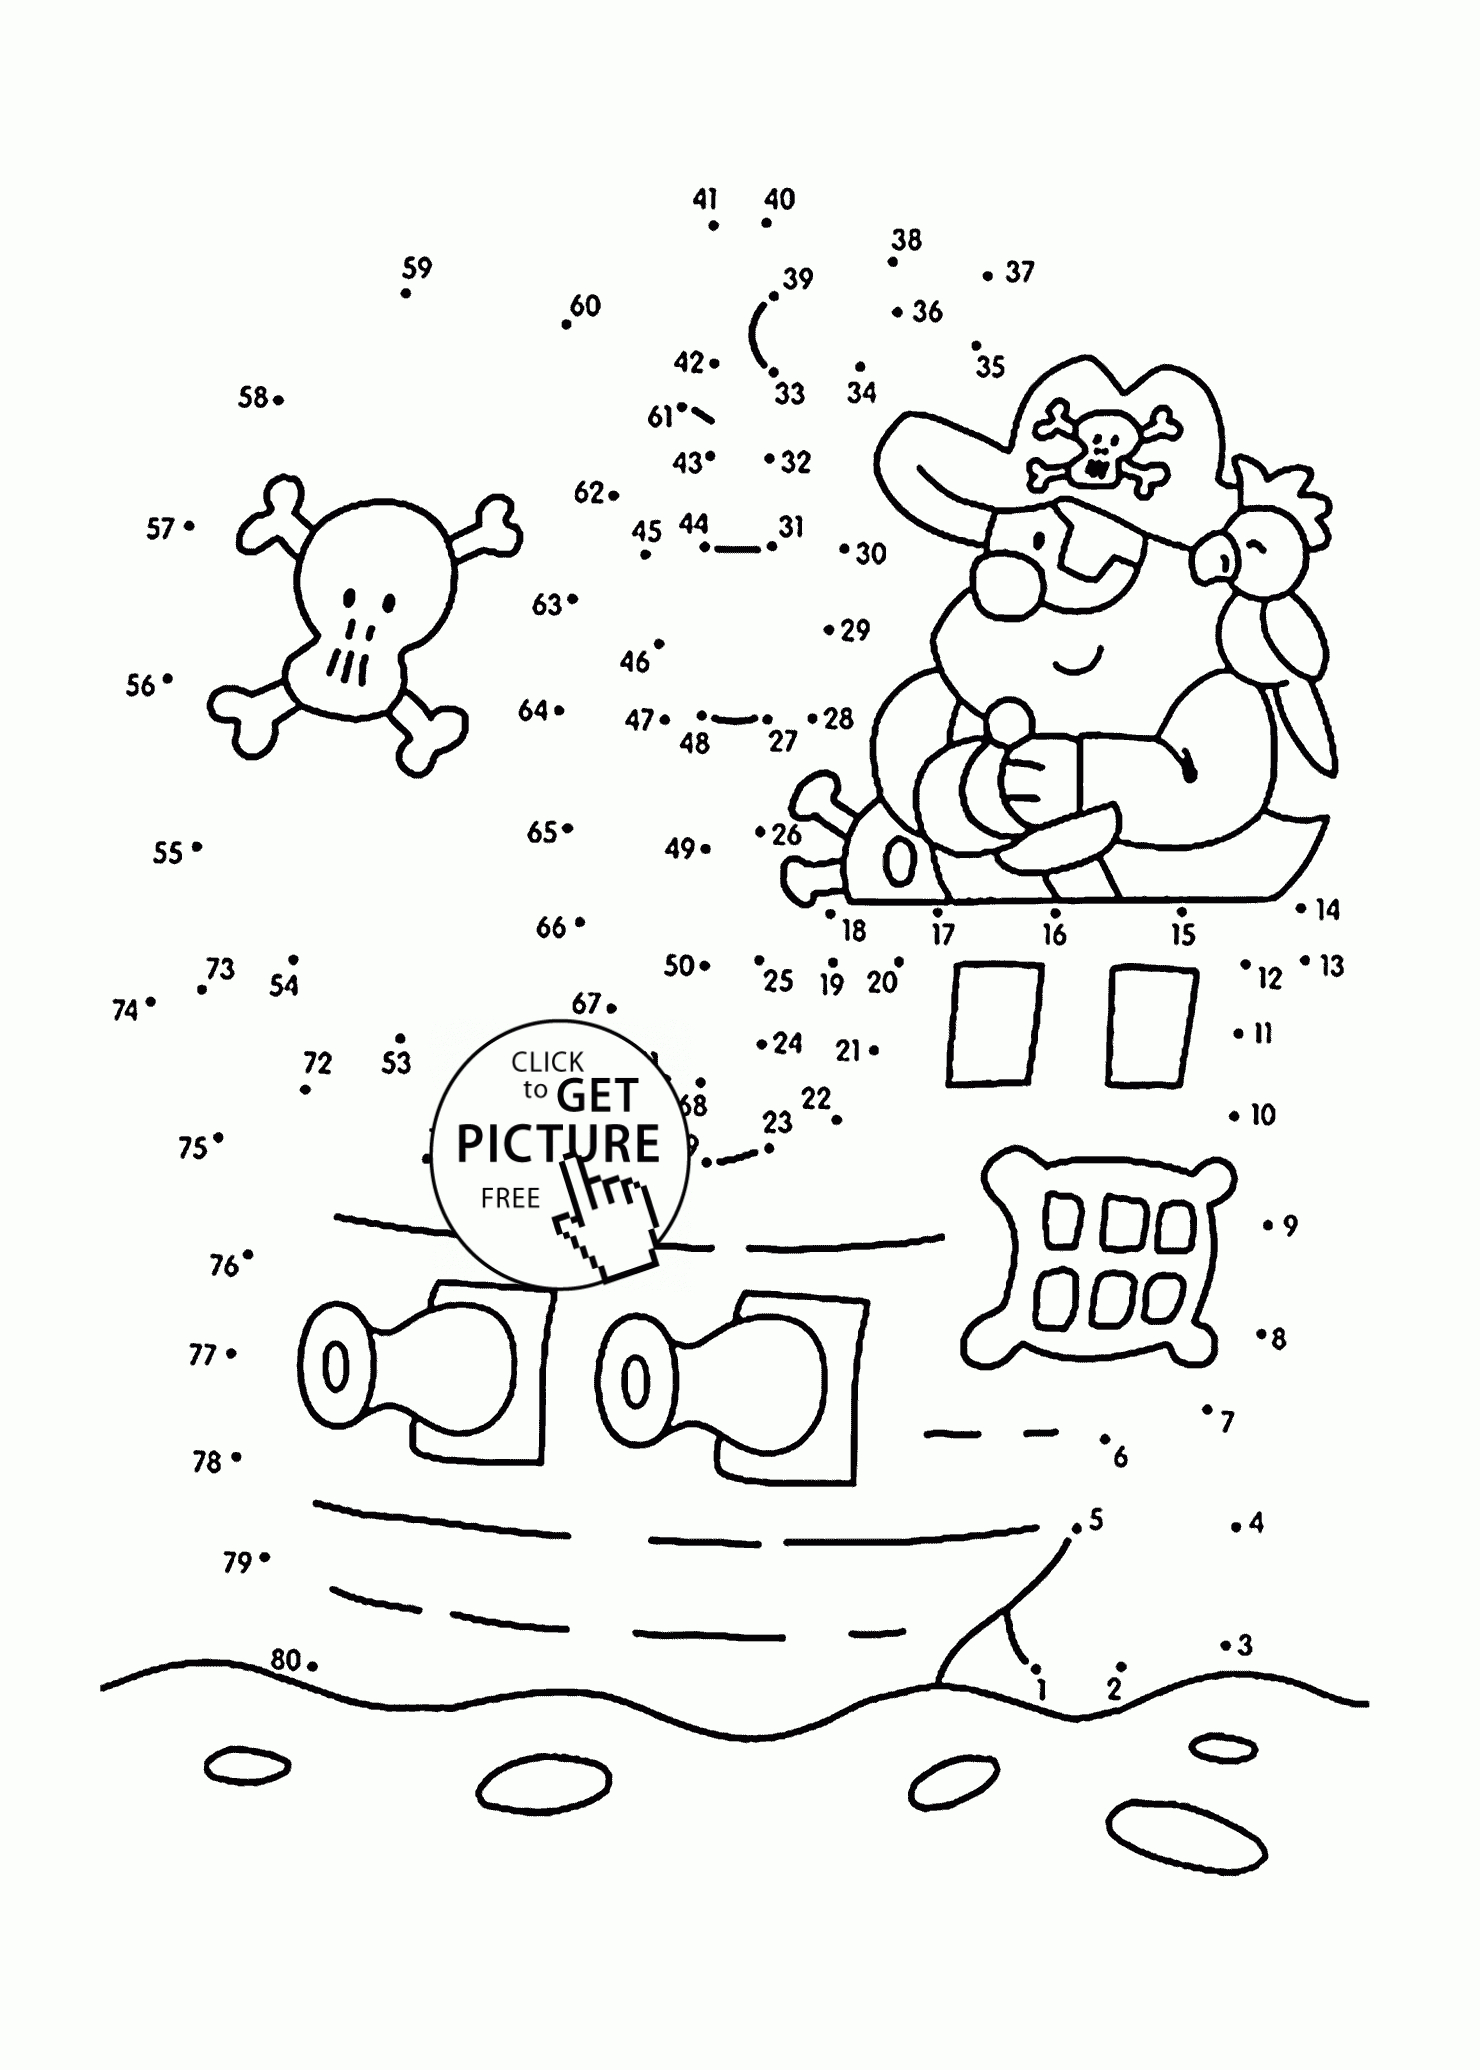 Pirate Dot To Dot Coloring Pages For Kids, Connect The Dots - Free Printable Connect The Dots